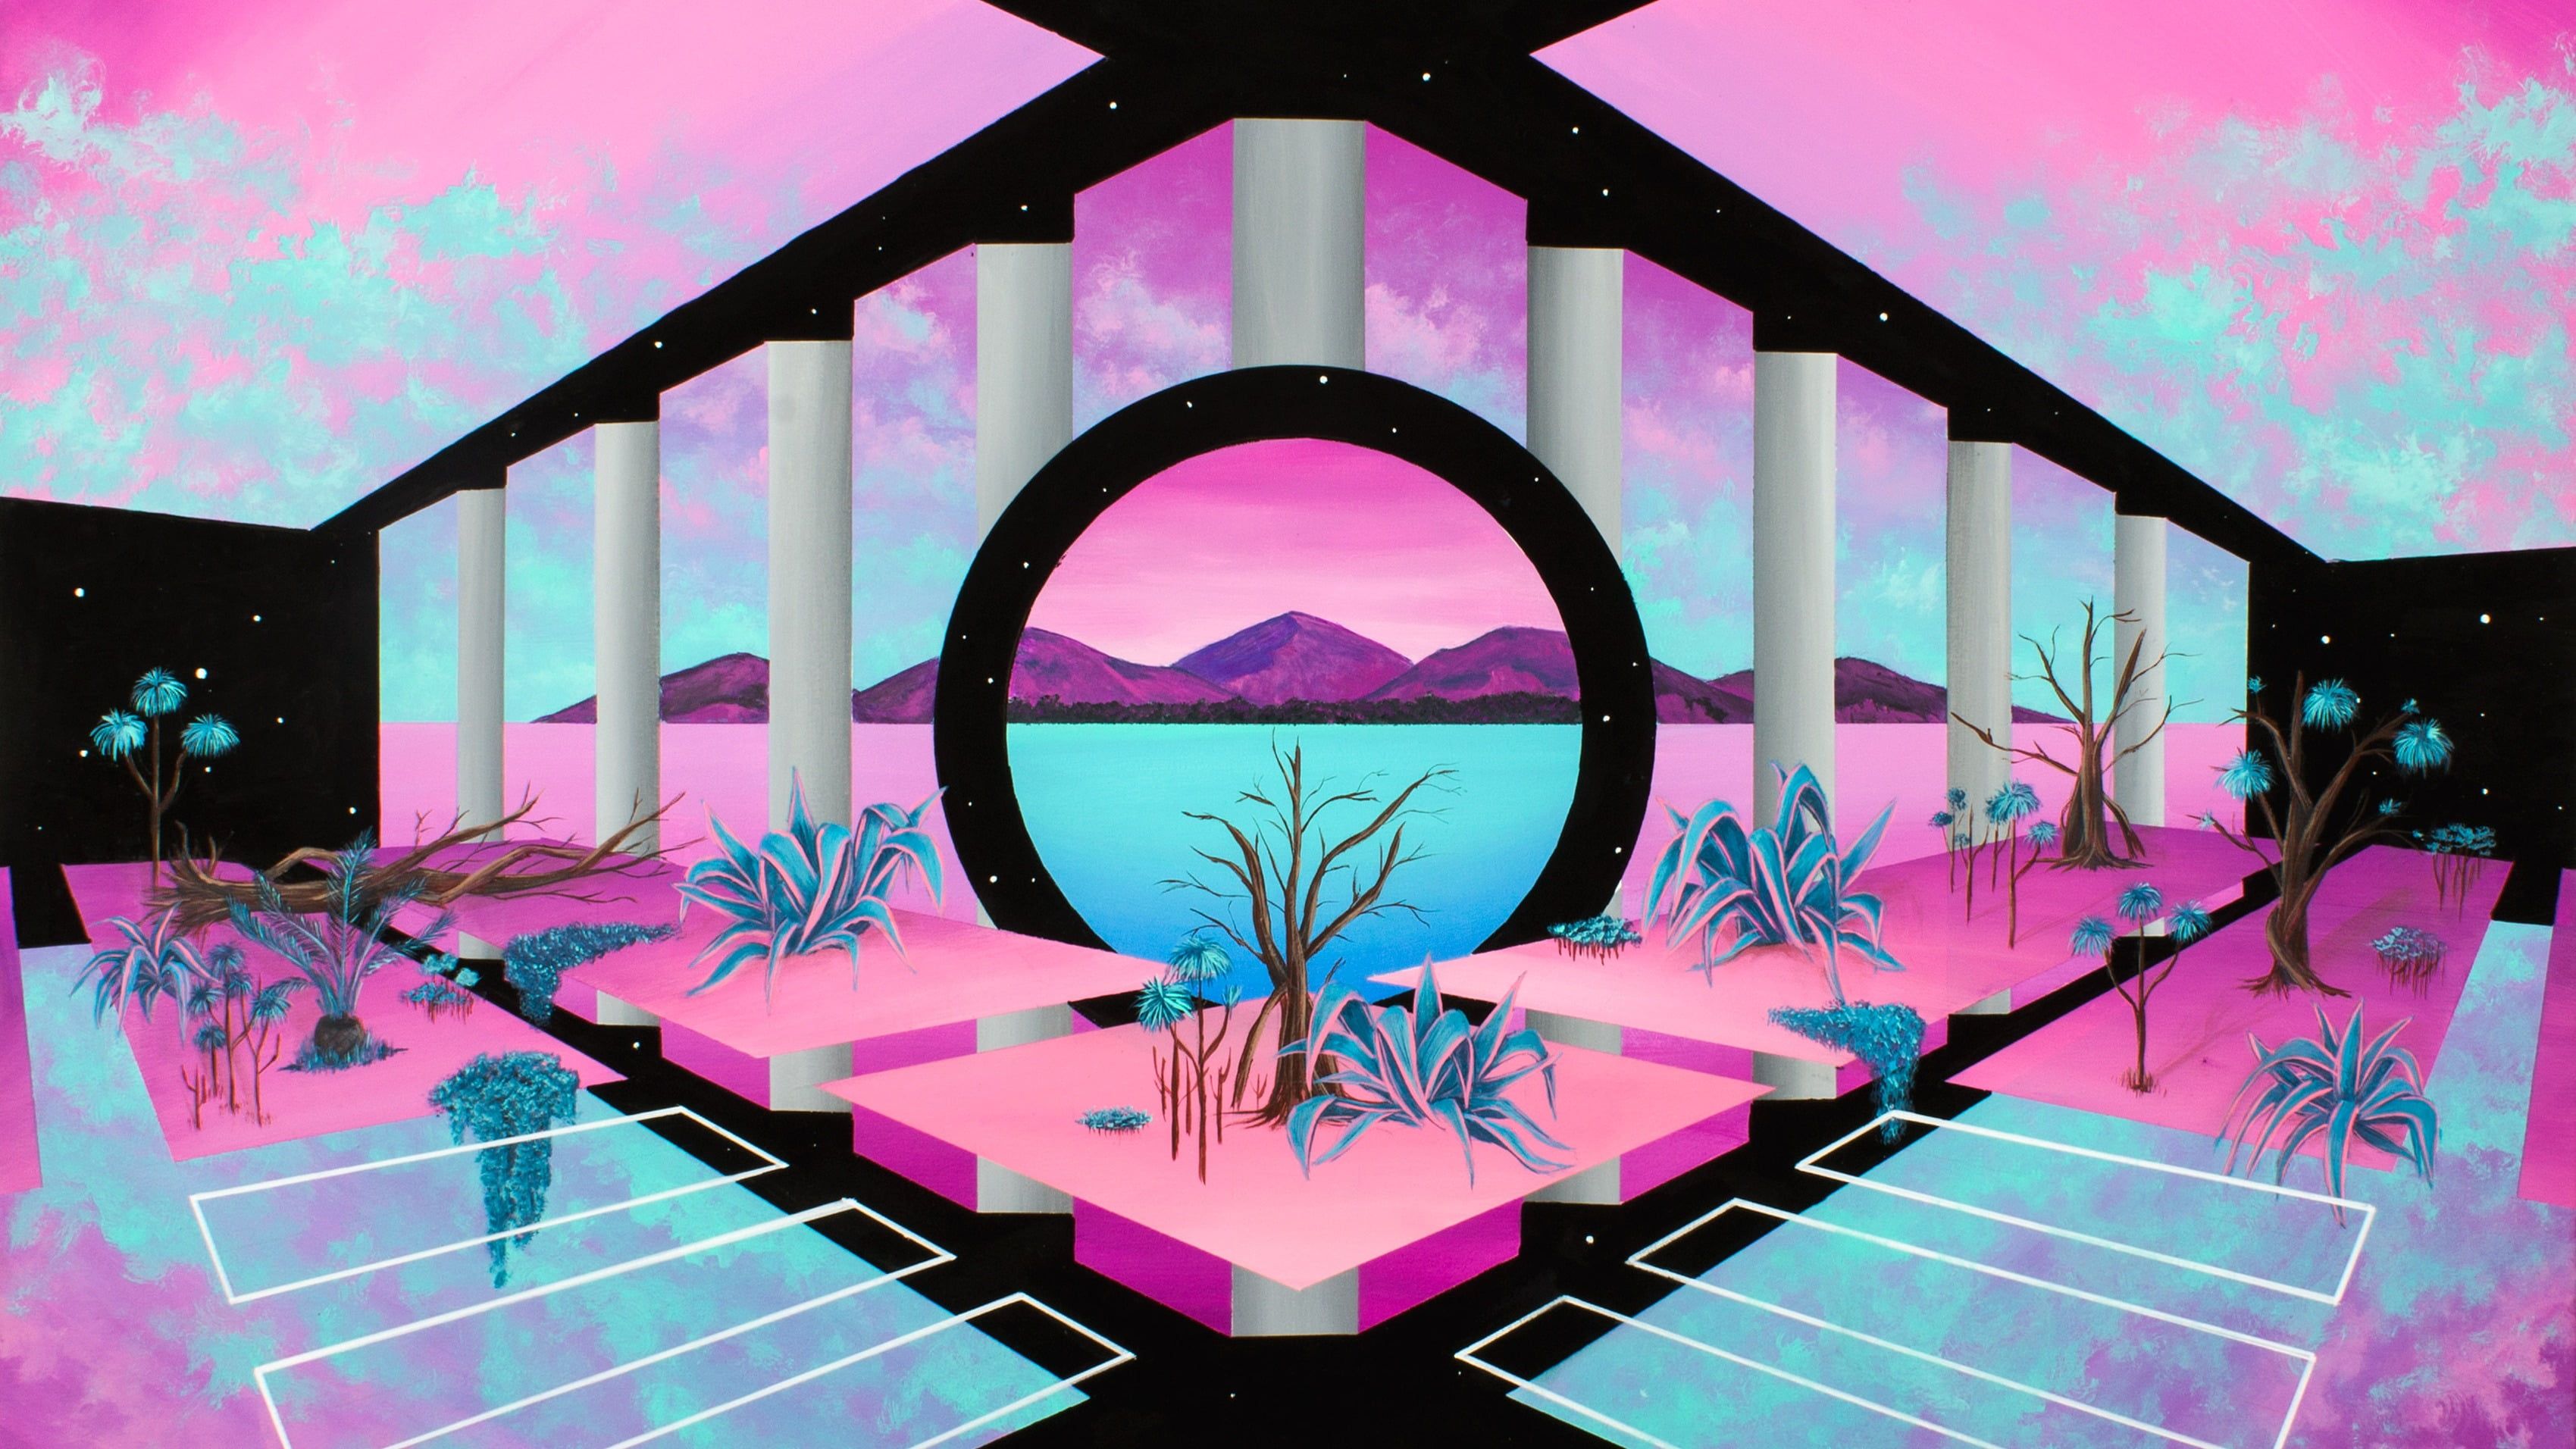 A pink and purple landscape with mountains in the background - Vaporwave